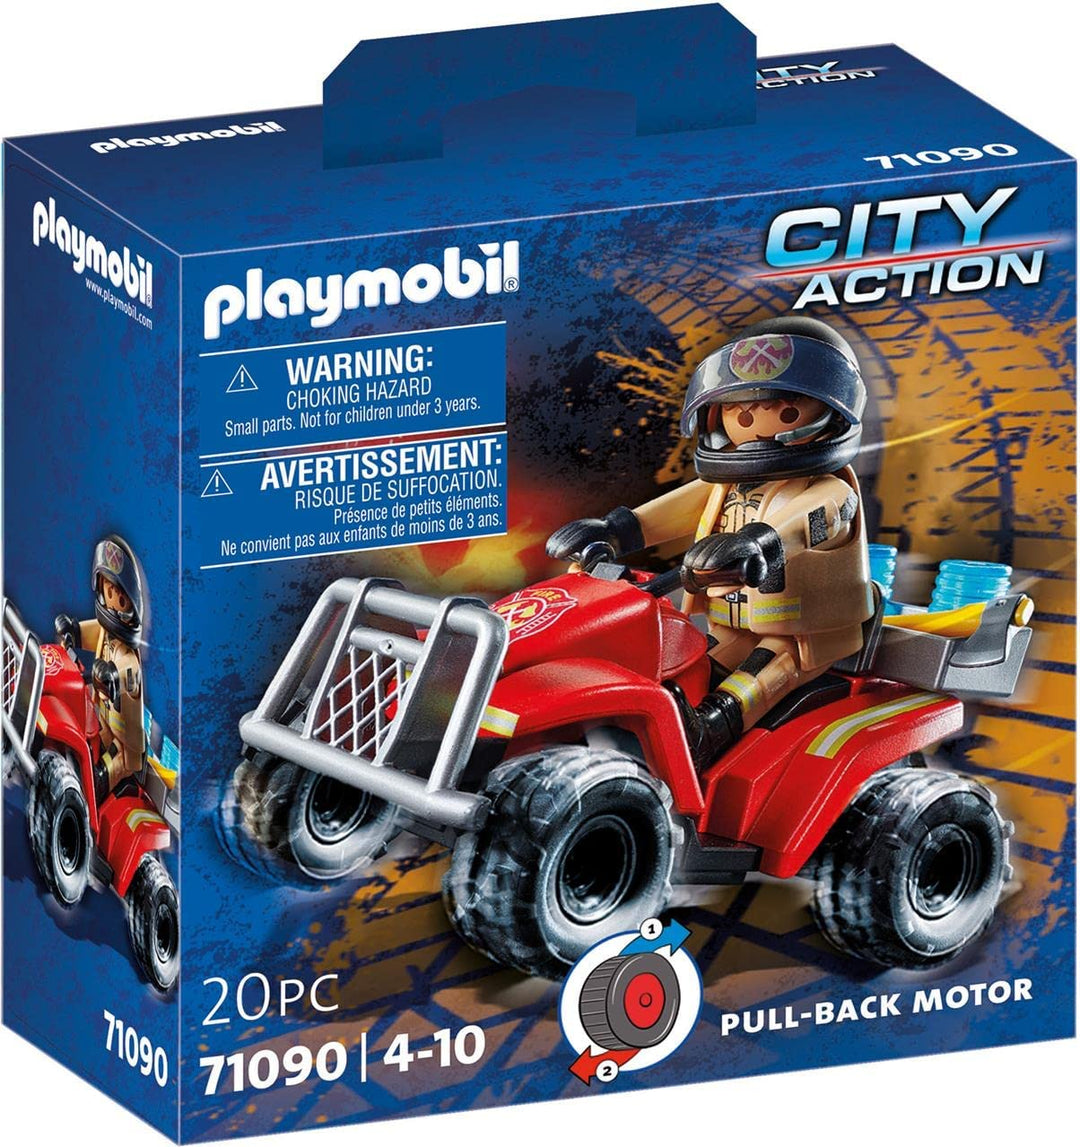 PLAYMOBIL City Action 71090 Fire Rescue Quad with Pullback Motor, Toy for Children